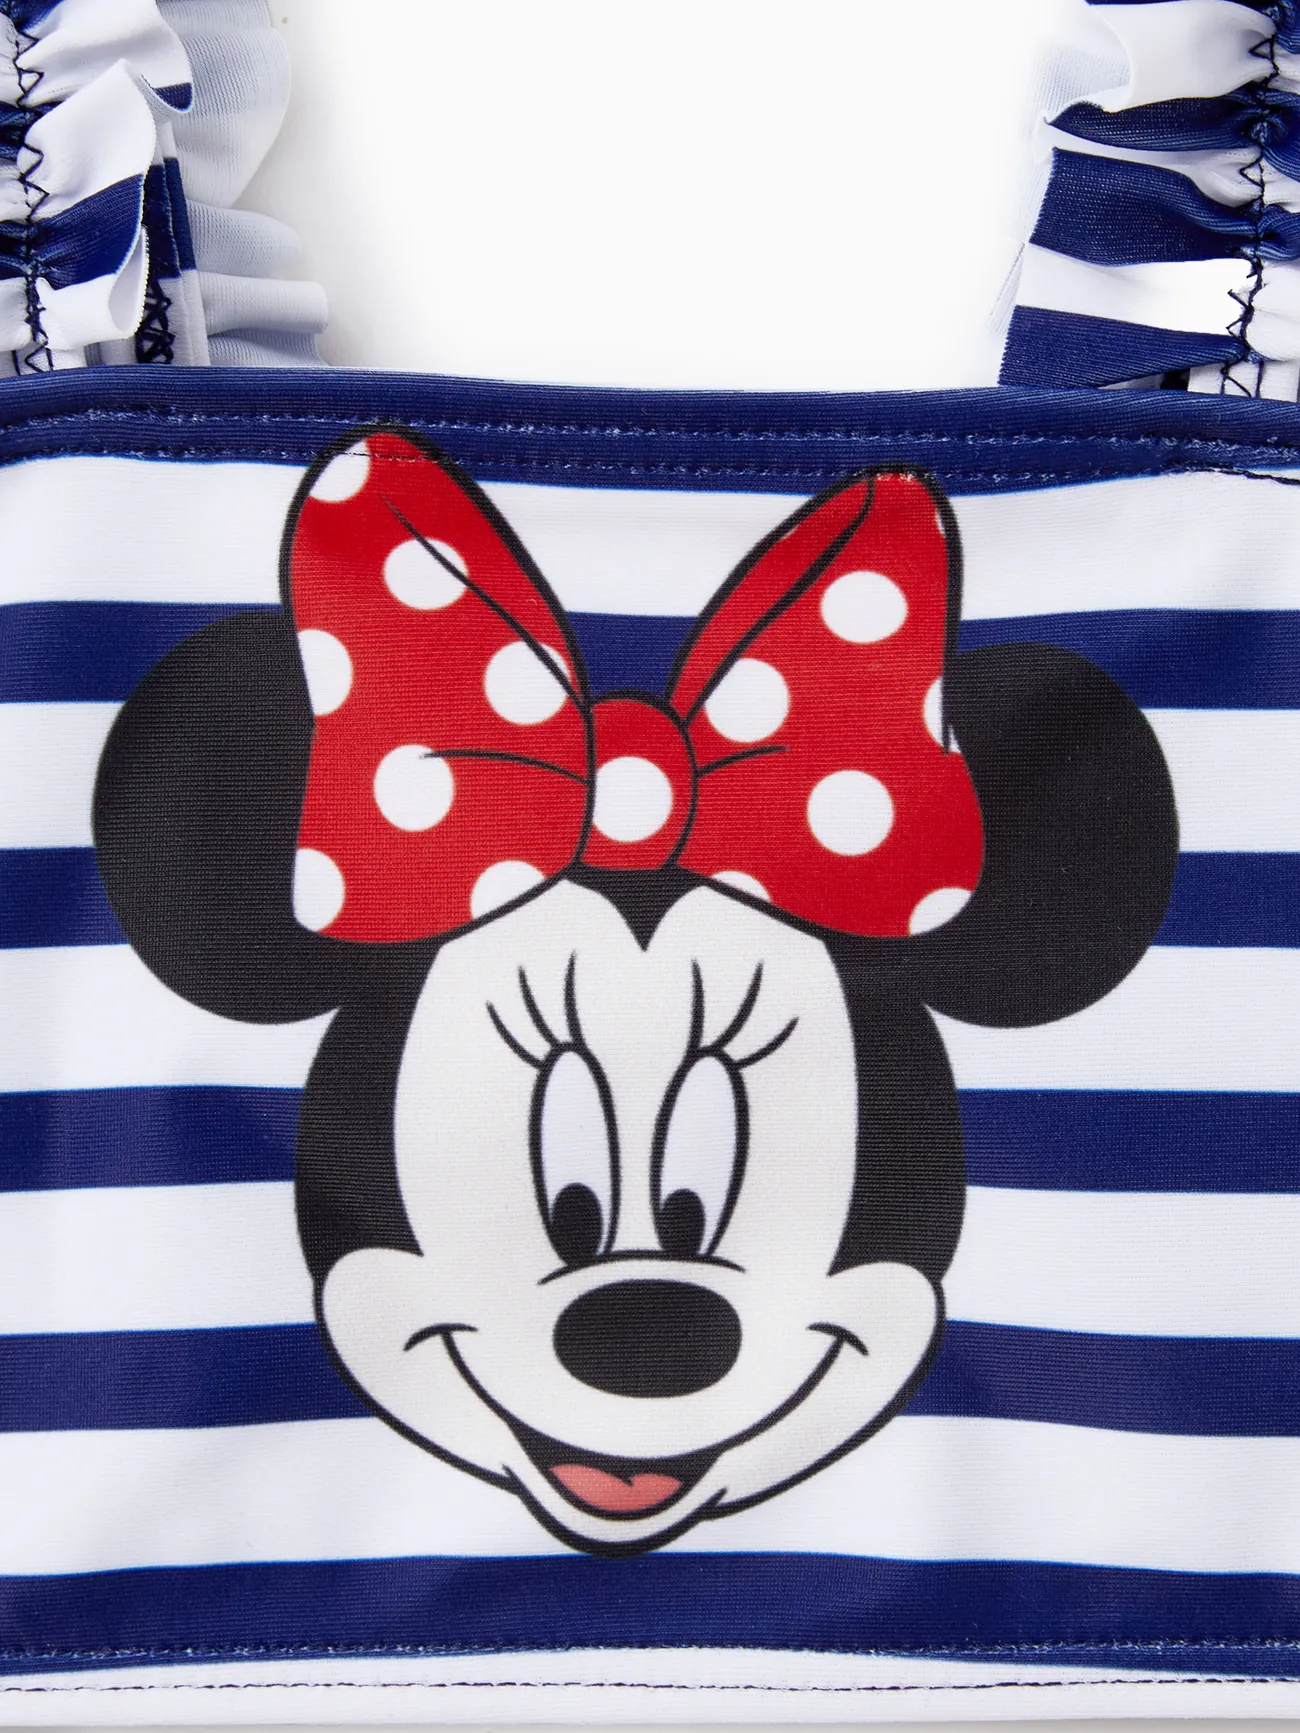 Disney Mickey and Friends Sibling Set Boys/Girls Character Stripped Swimsuit
 Dark Blue big image 1